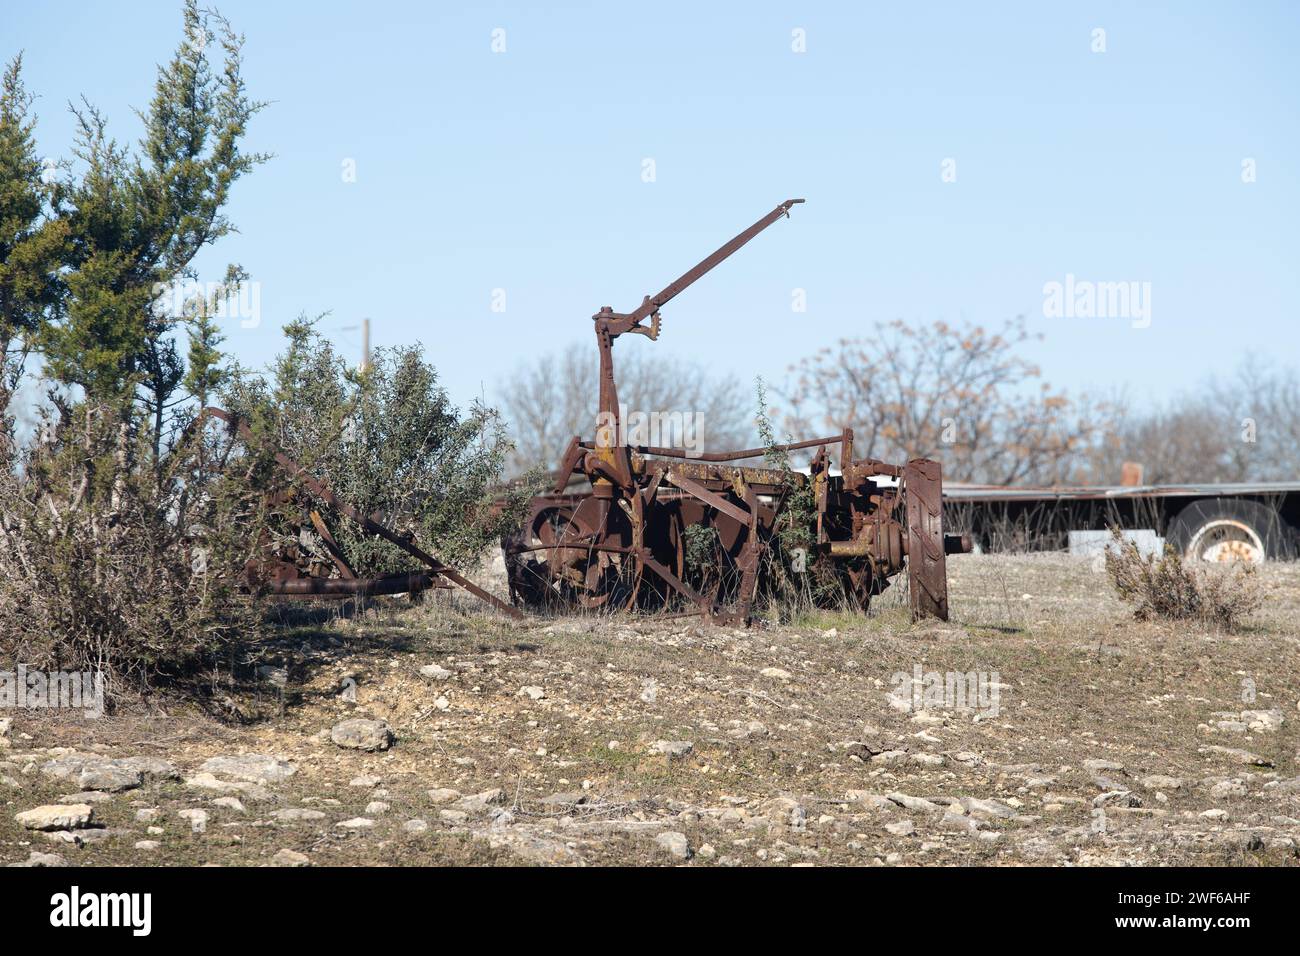 Abandoned, rusting vintage farm equipment in an open field Stock Photo